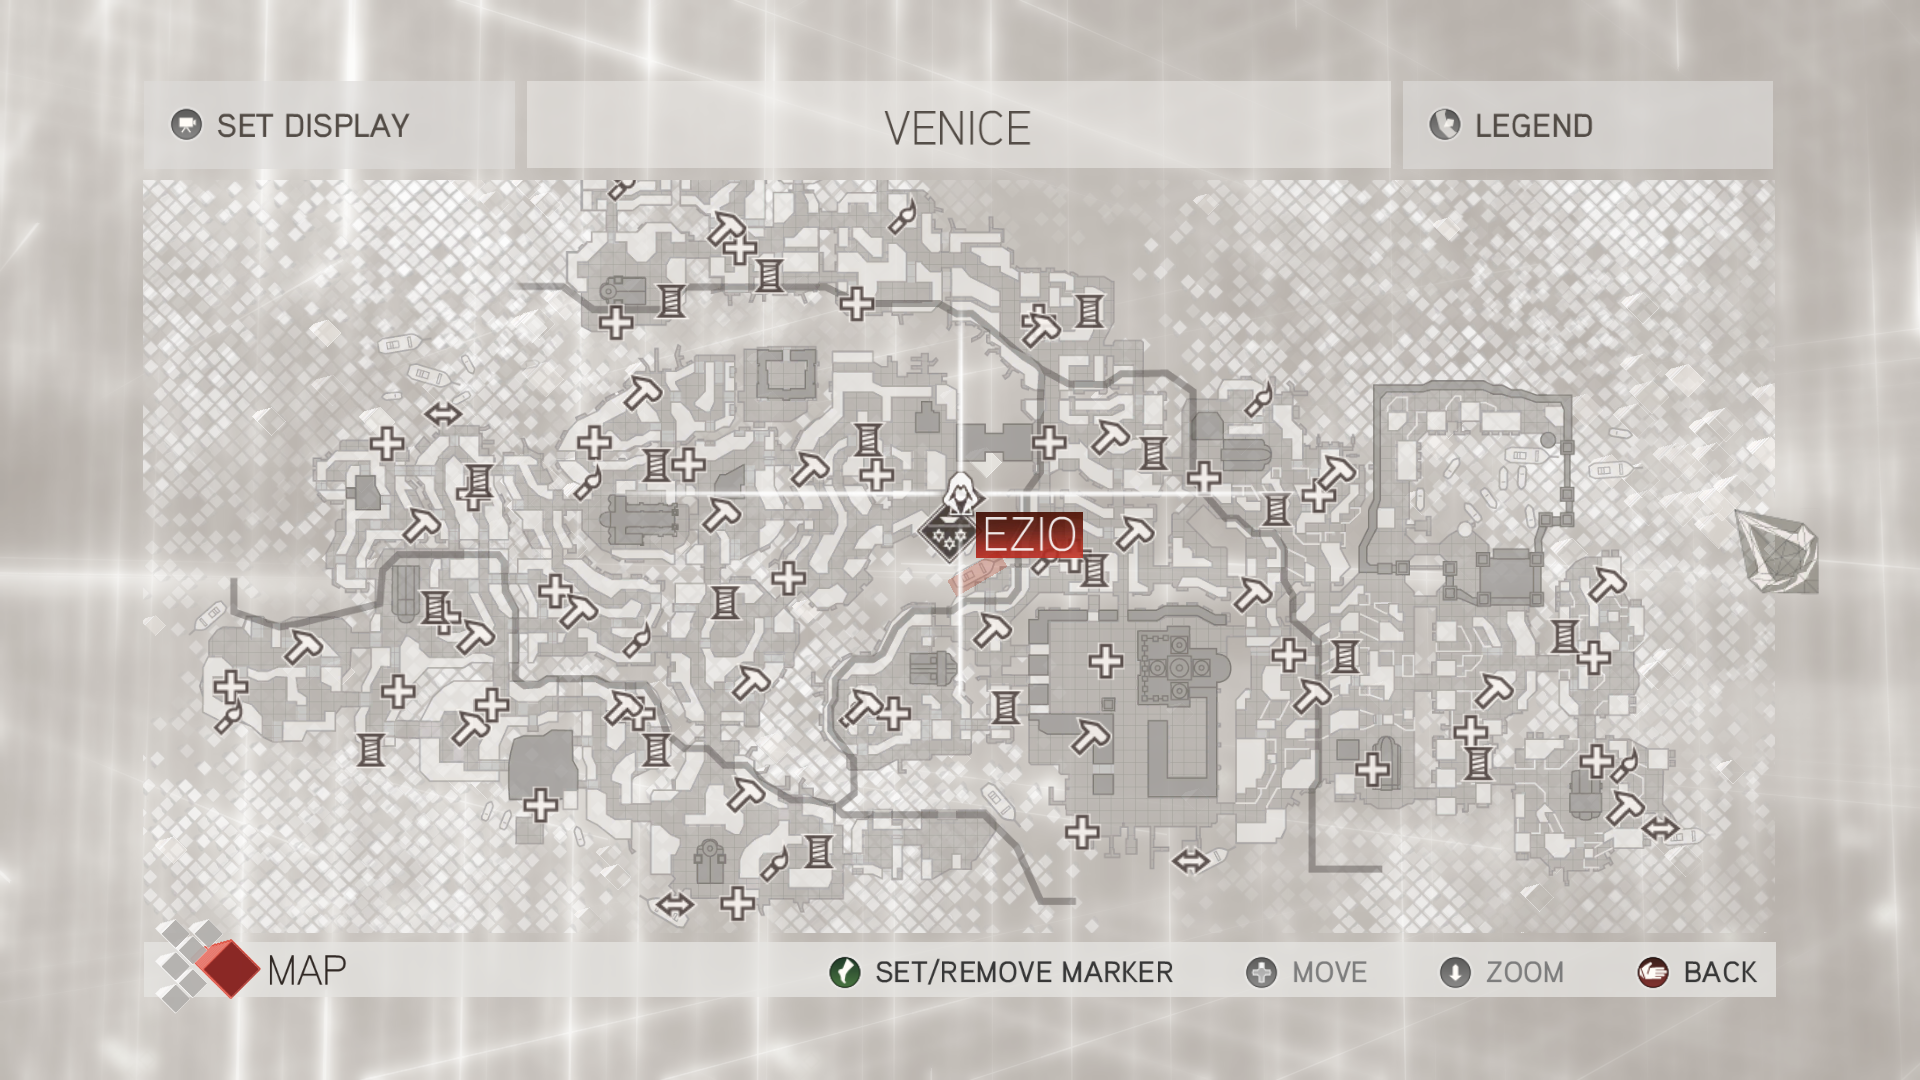 image-ac2-venice-map-png-assassin-s-creed-wiki-fandom-powered-by